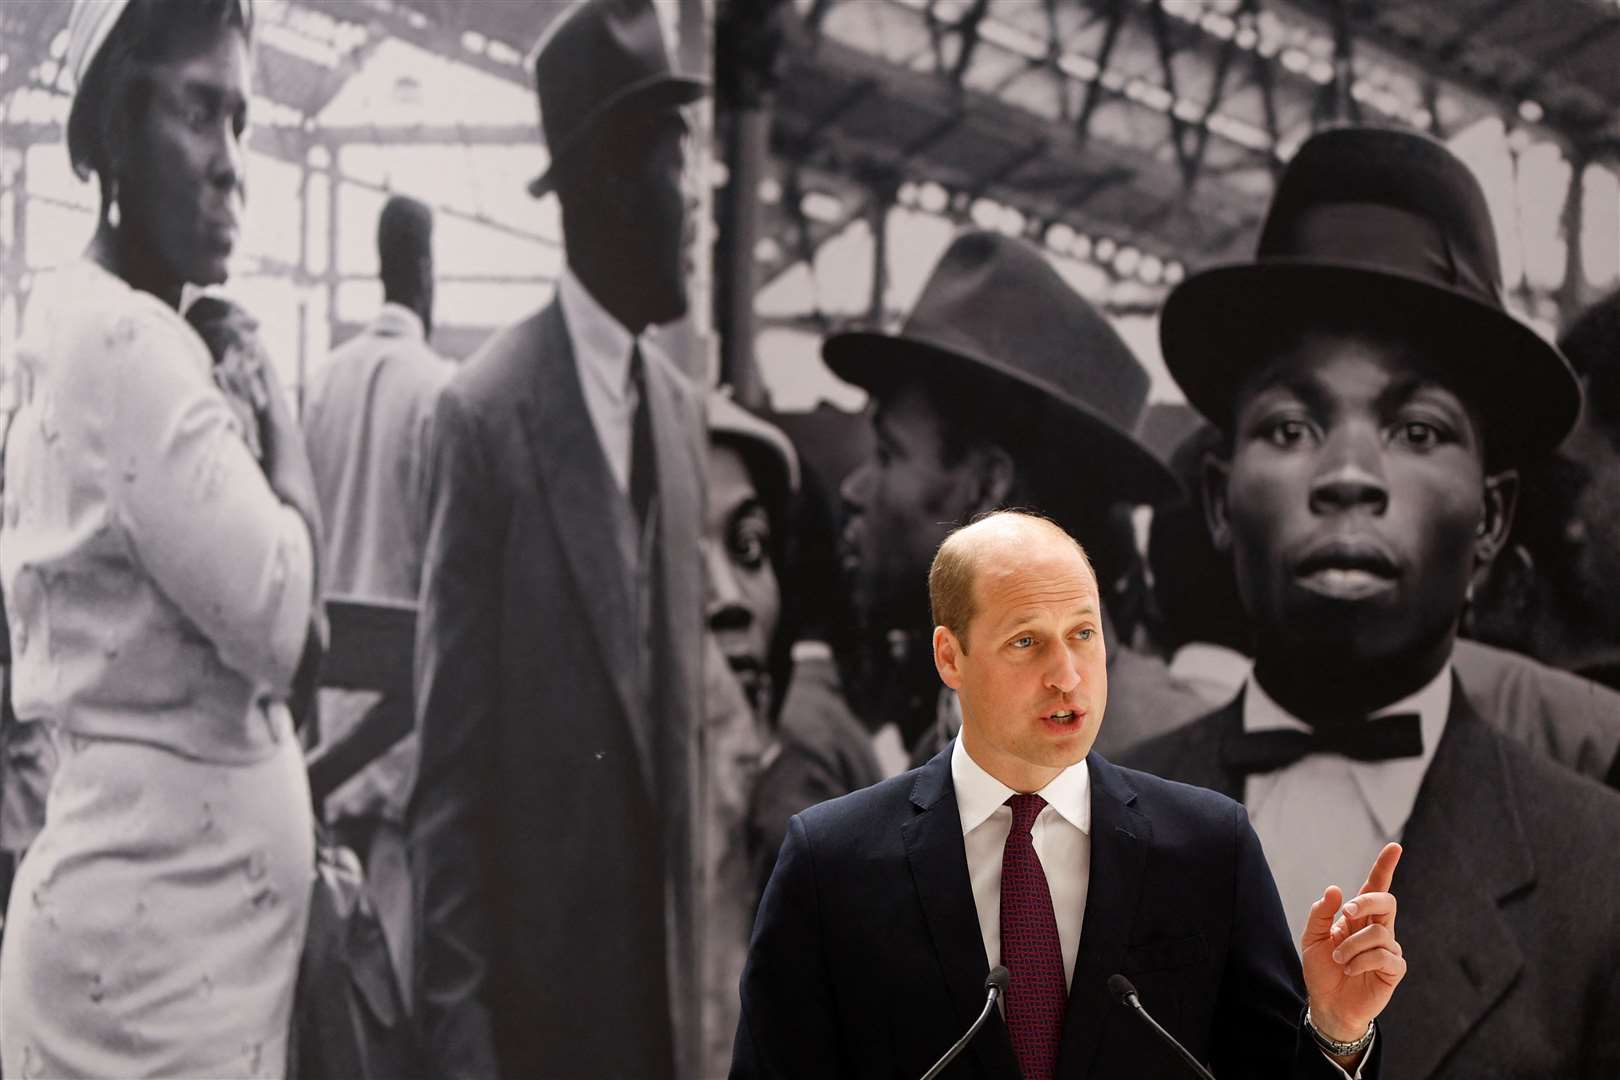 The Duke of Cambridge speaking at the unveiling (John Sibley/PA)